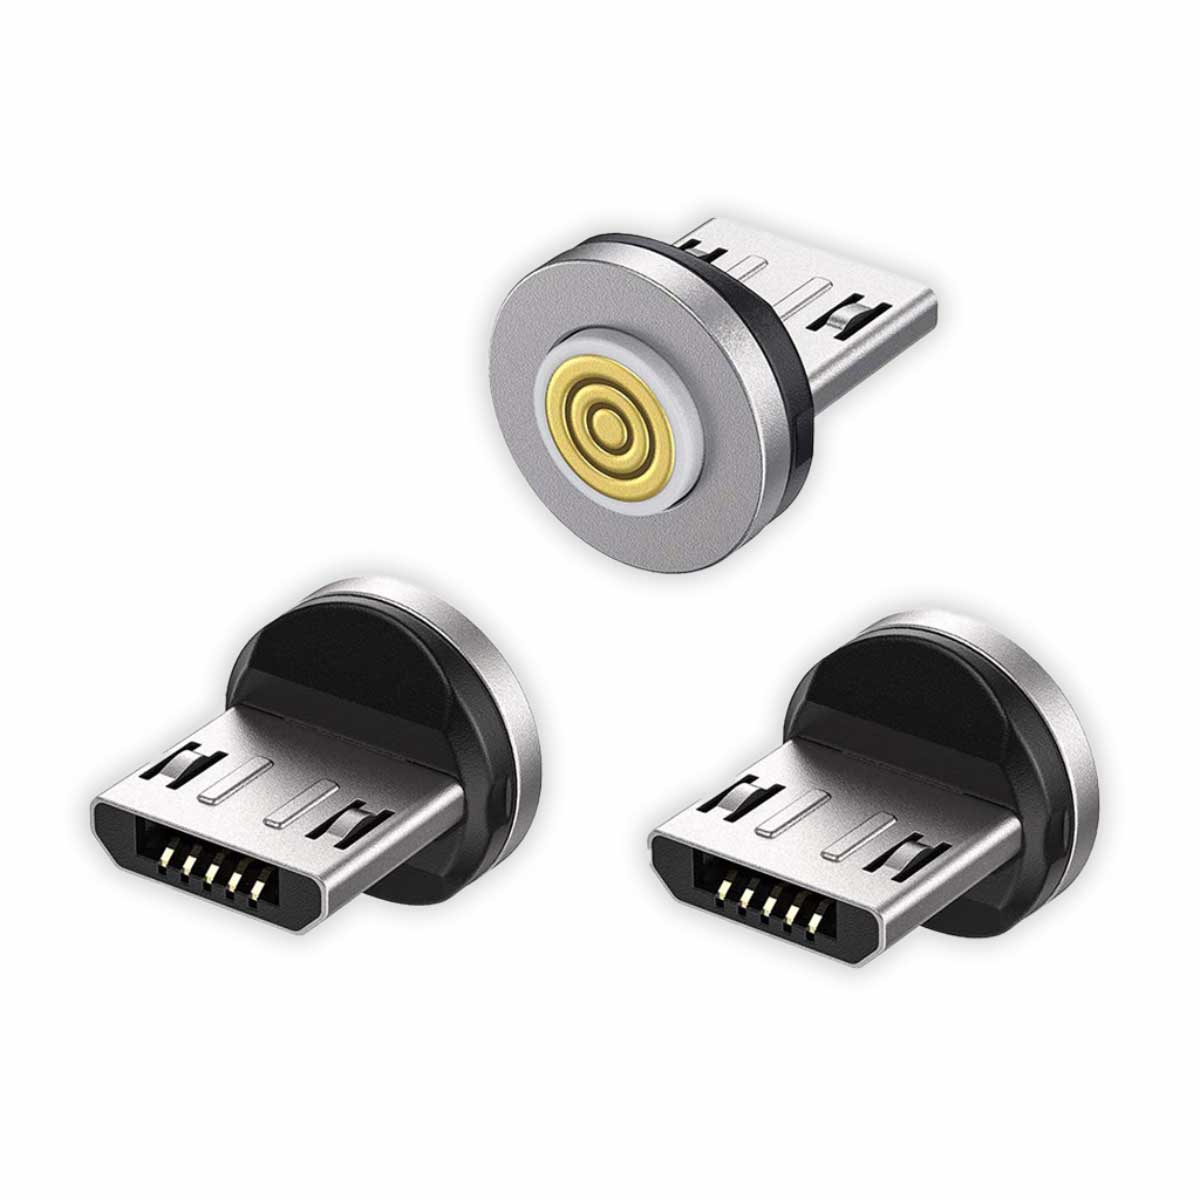 Extra Connectors for Magnilink MAXX - Pack of 3